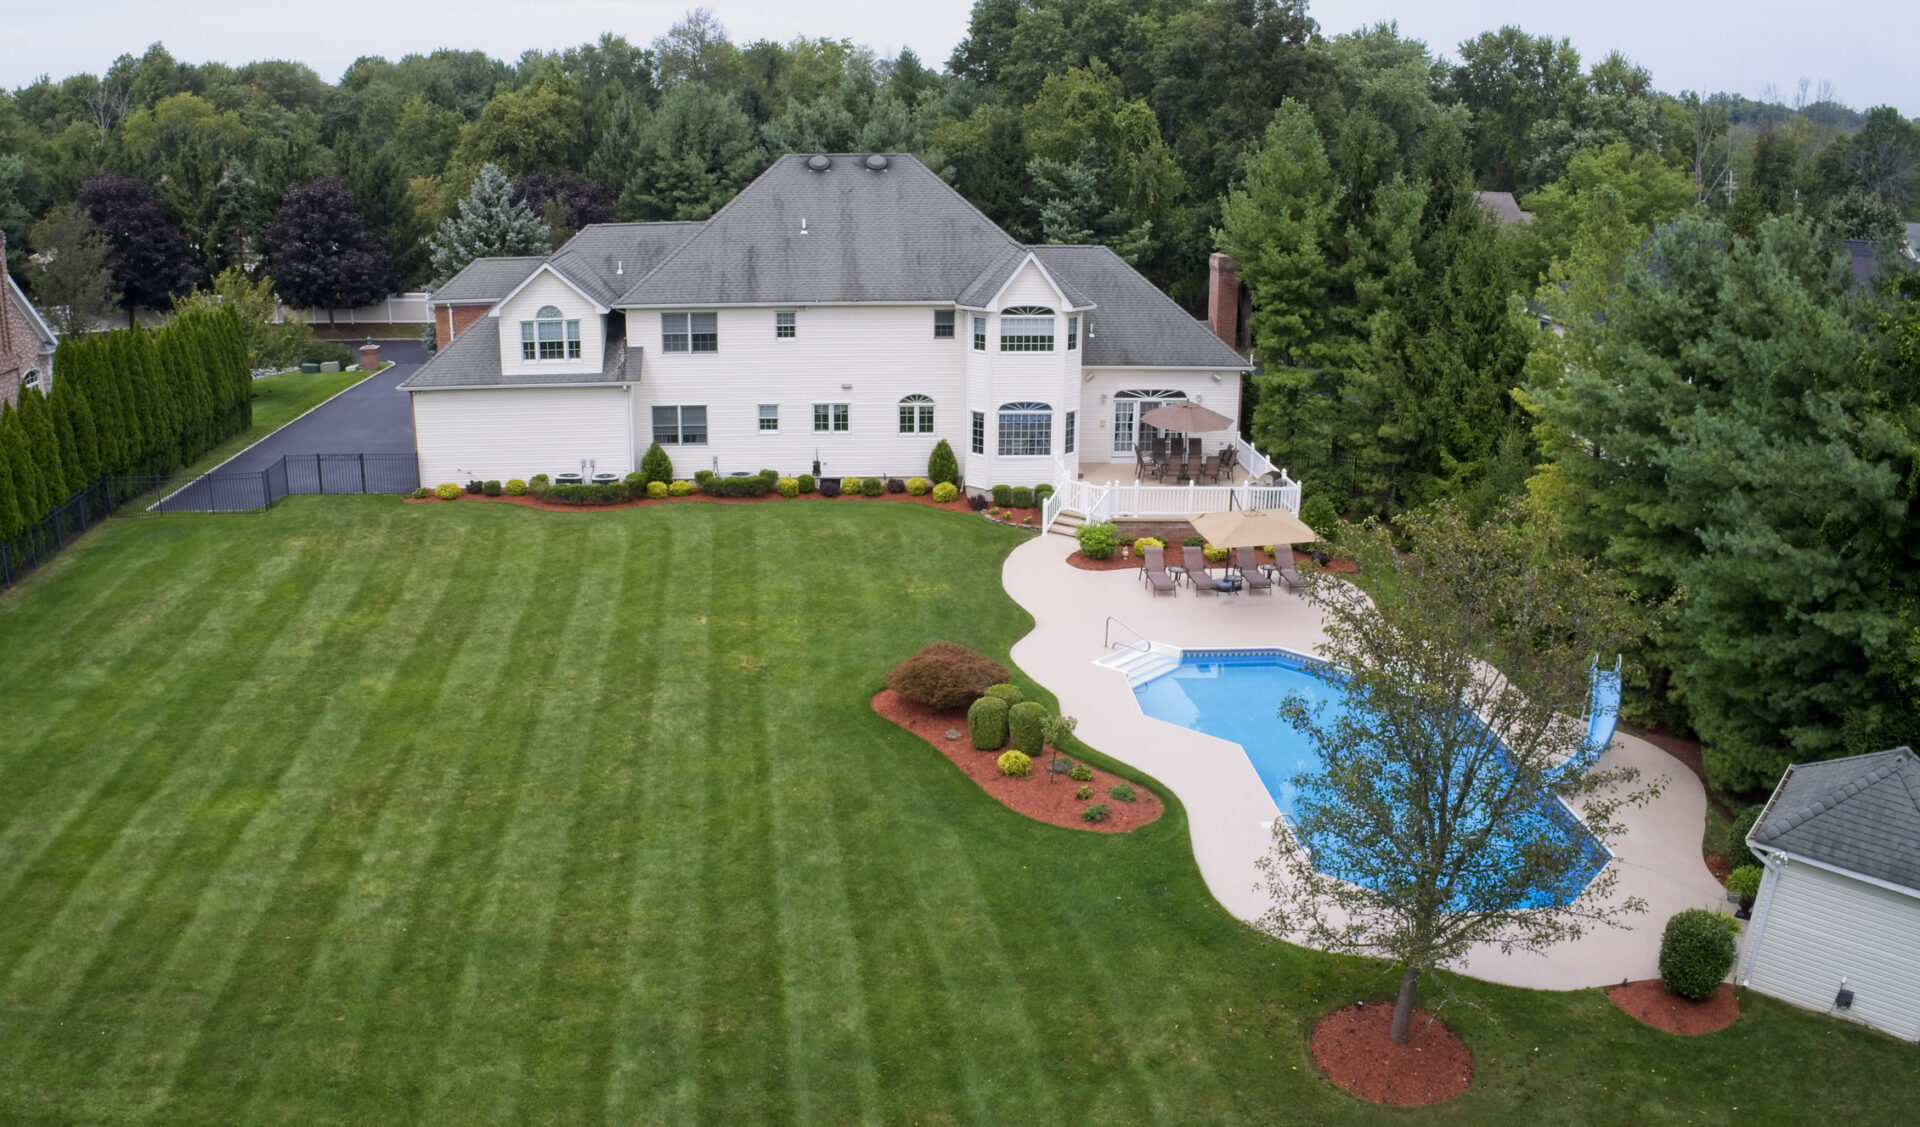 This is an aerial view of a large two-story house with a well-manicured lawn, an in-ground swimming pool, and surrounded by trees.